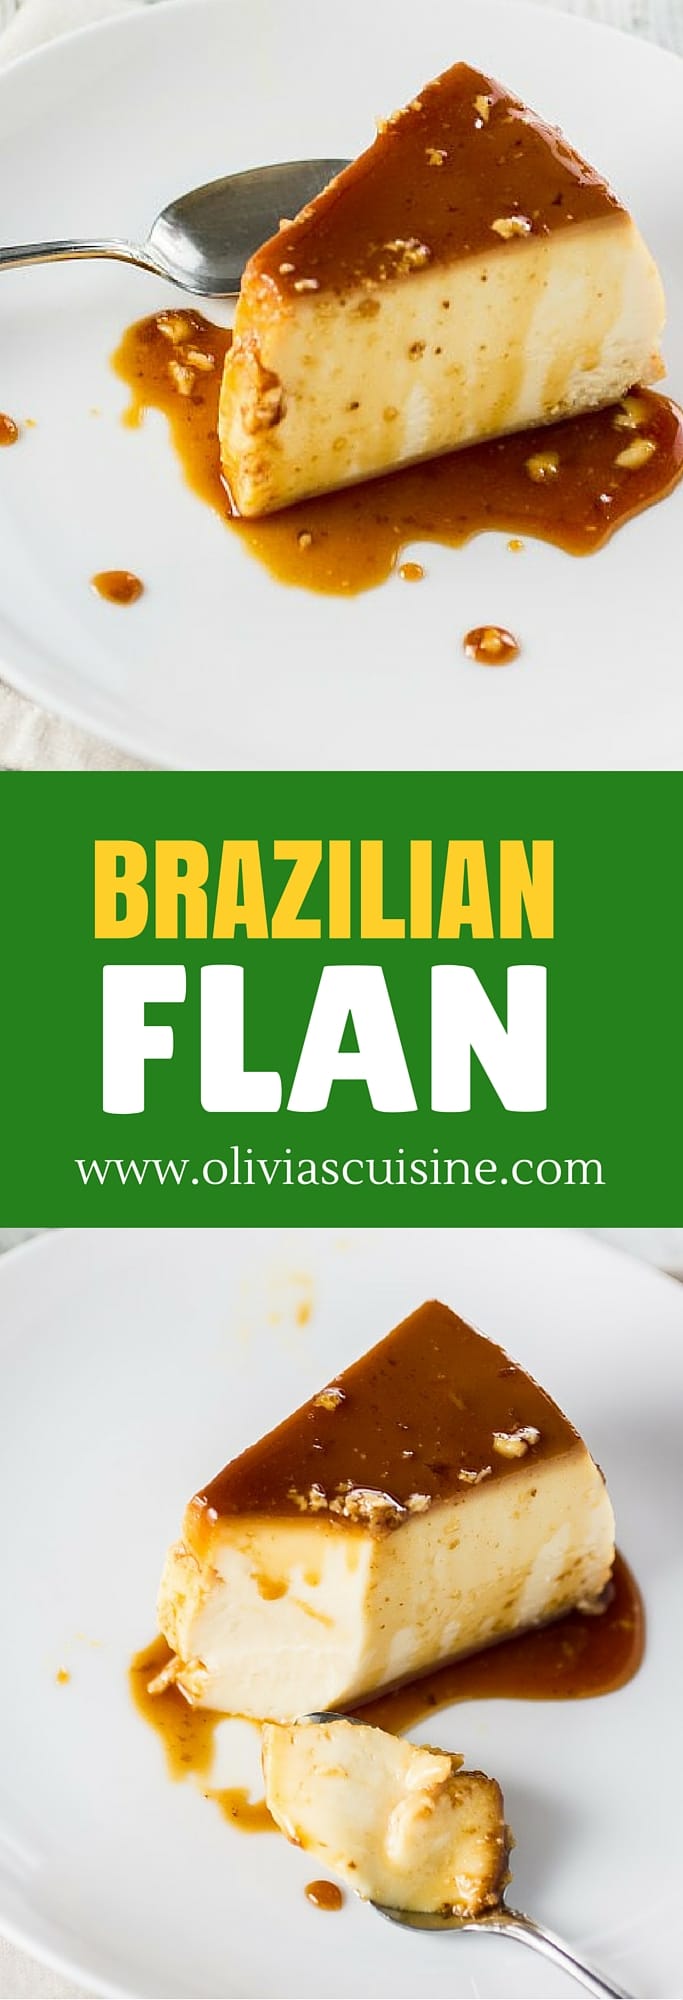 Brazilian Flan | www.oliviascuisine.com | If you've ever tried Brazilian Flan, you know what the fuss is all about. Delicious and creamy, it makes the most perfect dessert ever!